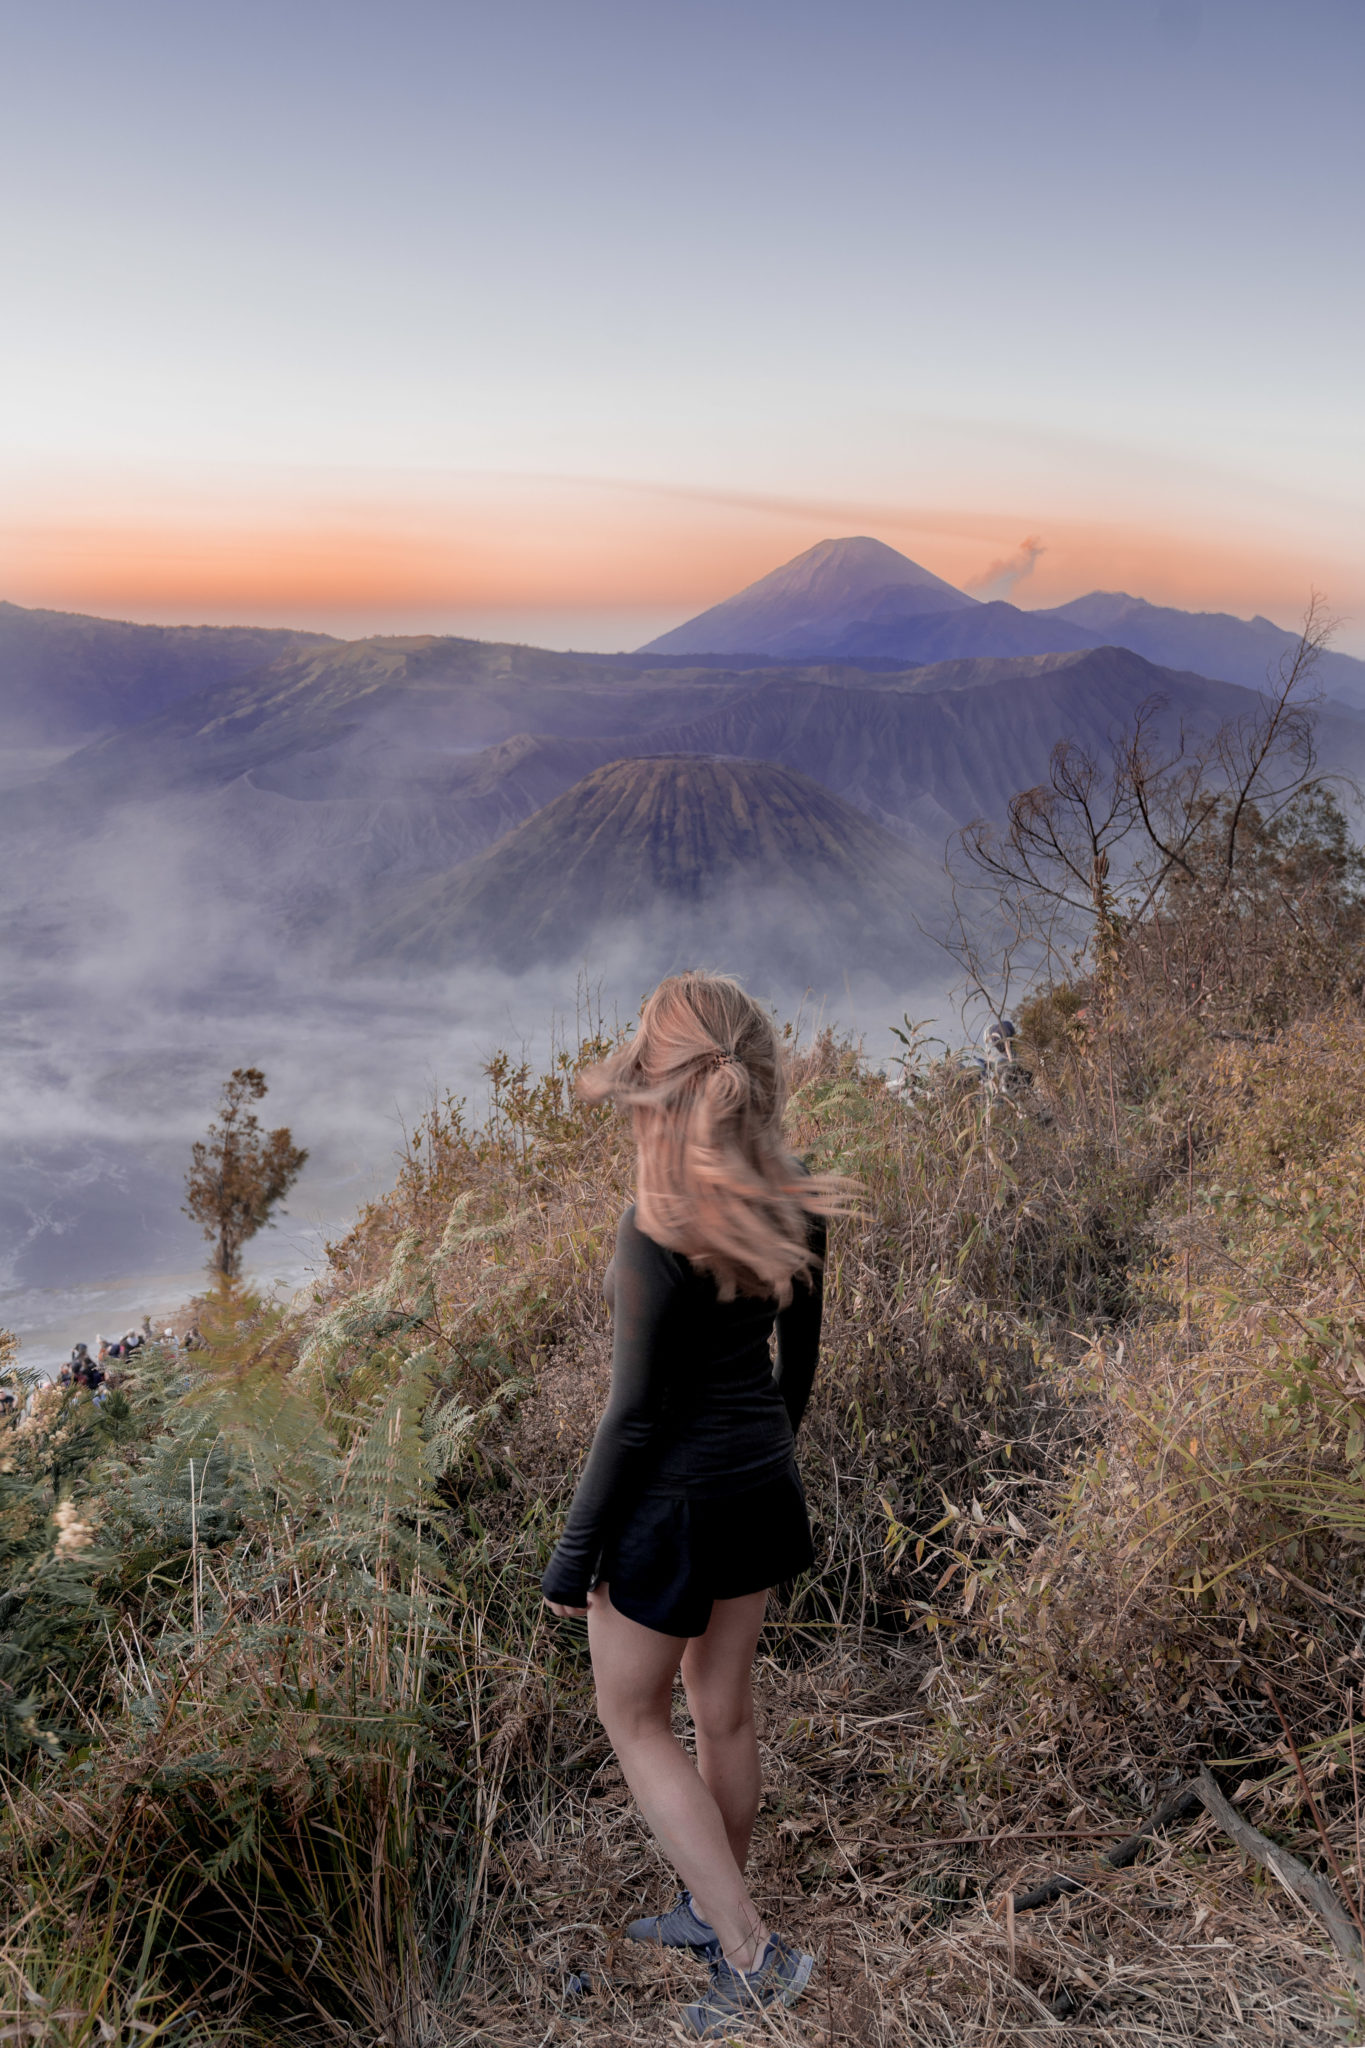 Day Trip to Mount Bromo Volcano in Indonesia